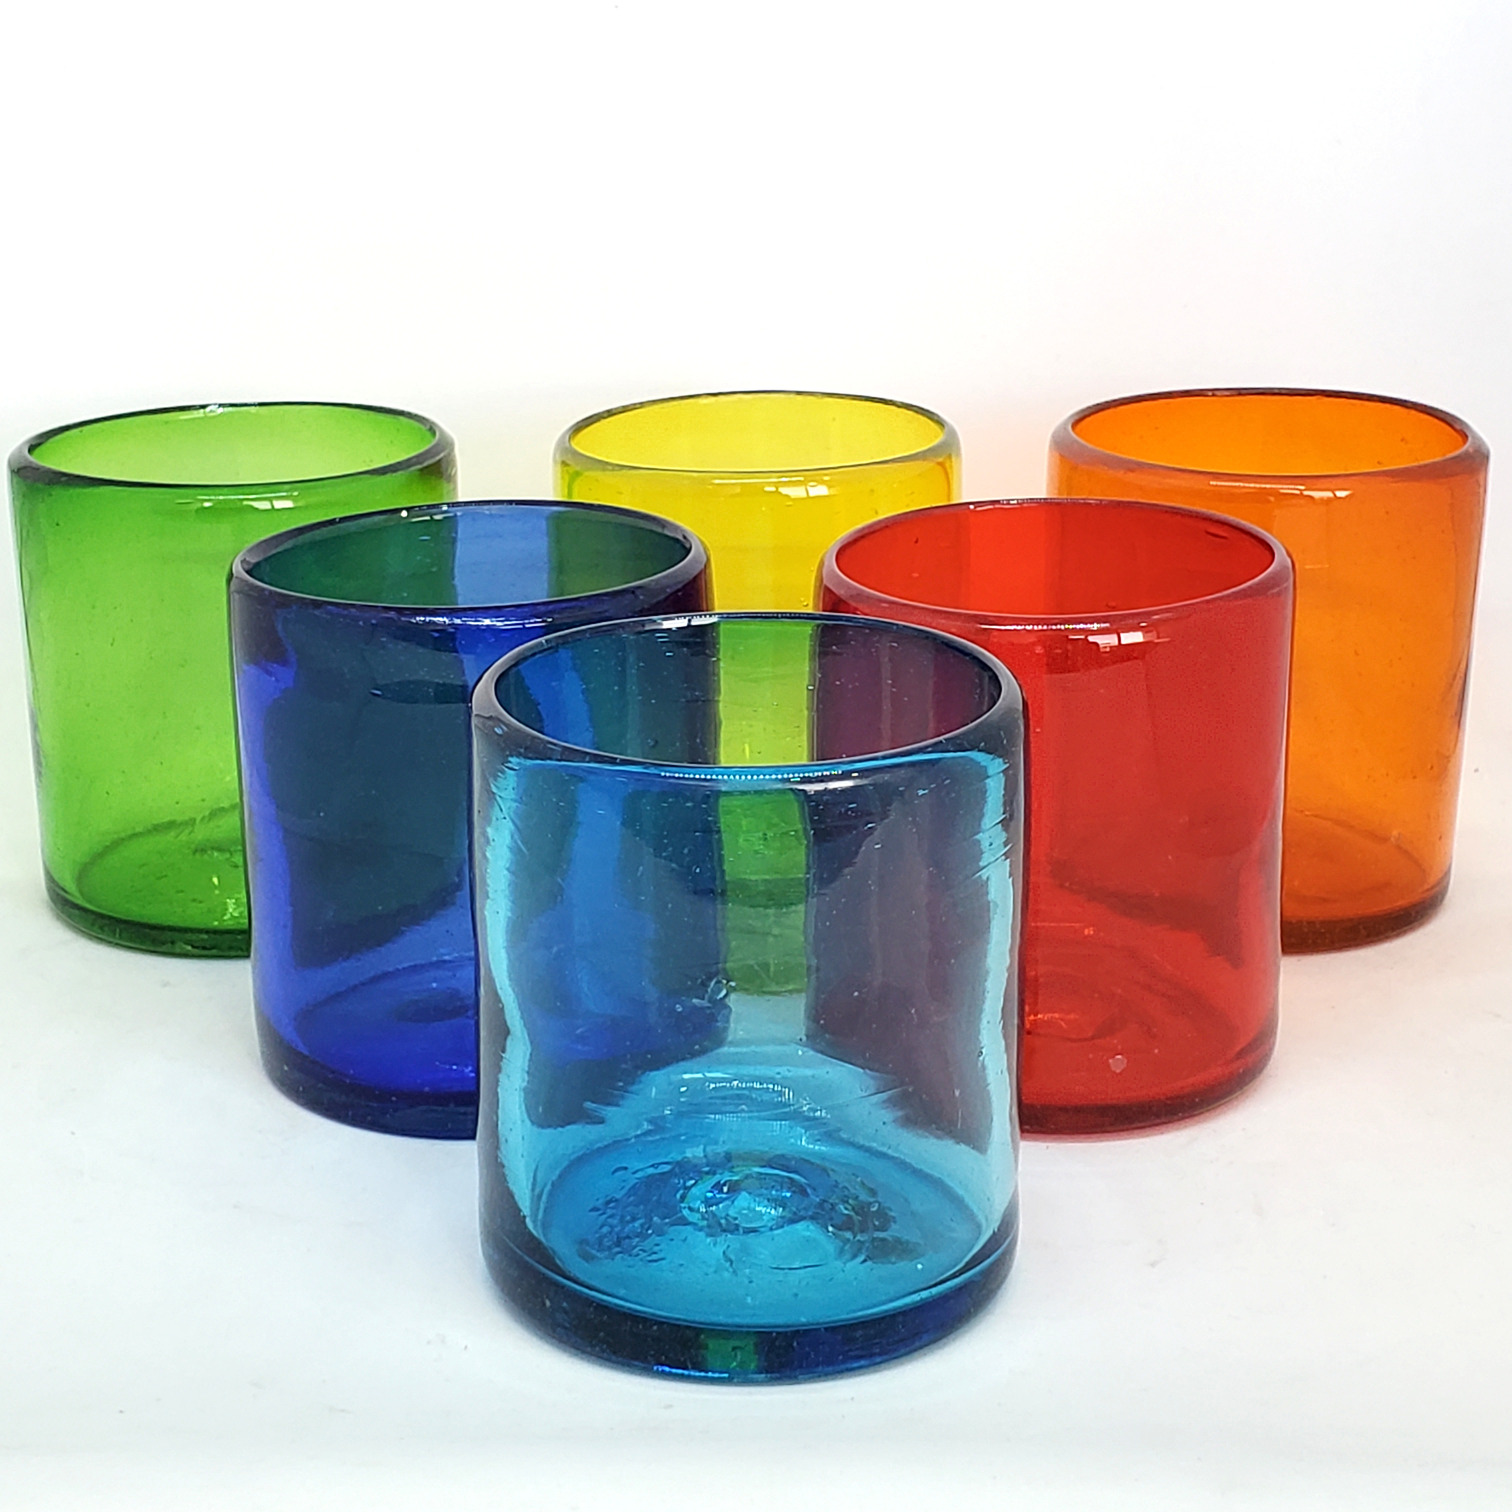 Wholesale Mexican Glasses / Rainbow Colored 9 oz Short Tumblers  / Enhance your favorite drink with these colorful handcrafted glasses.